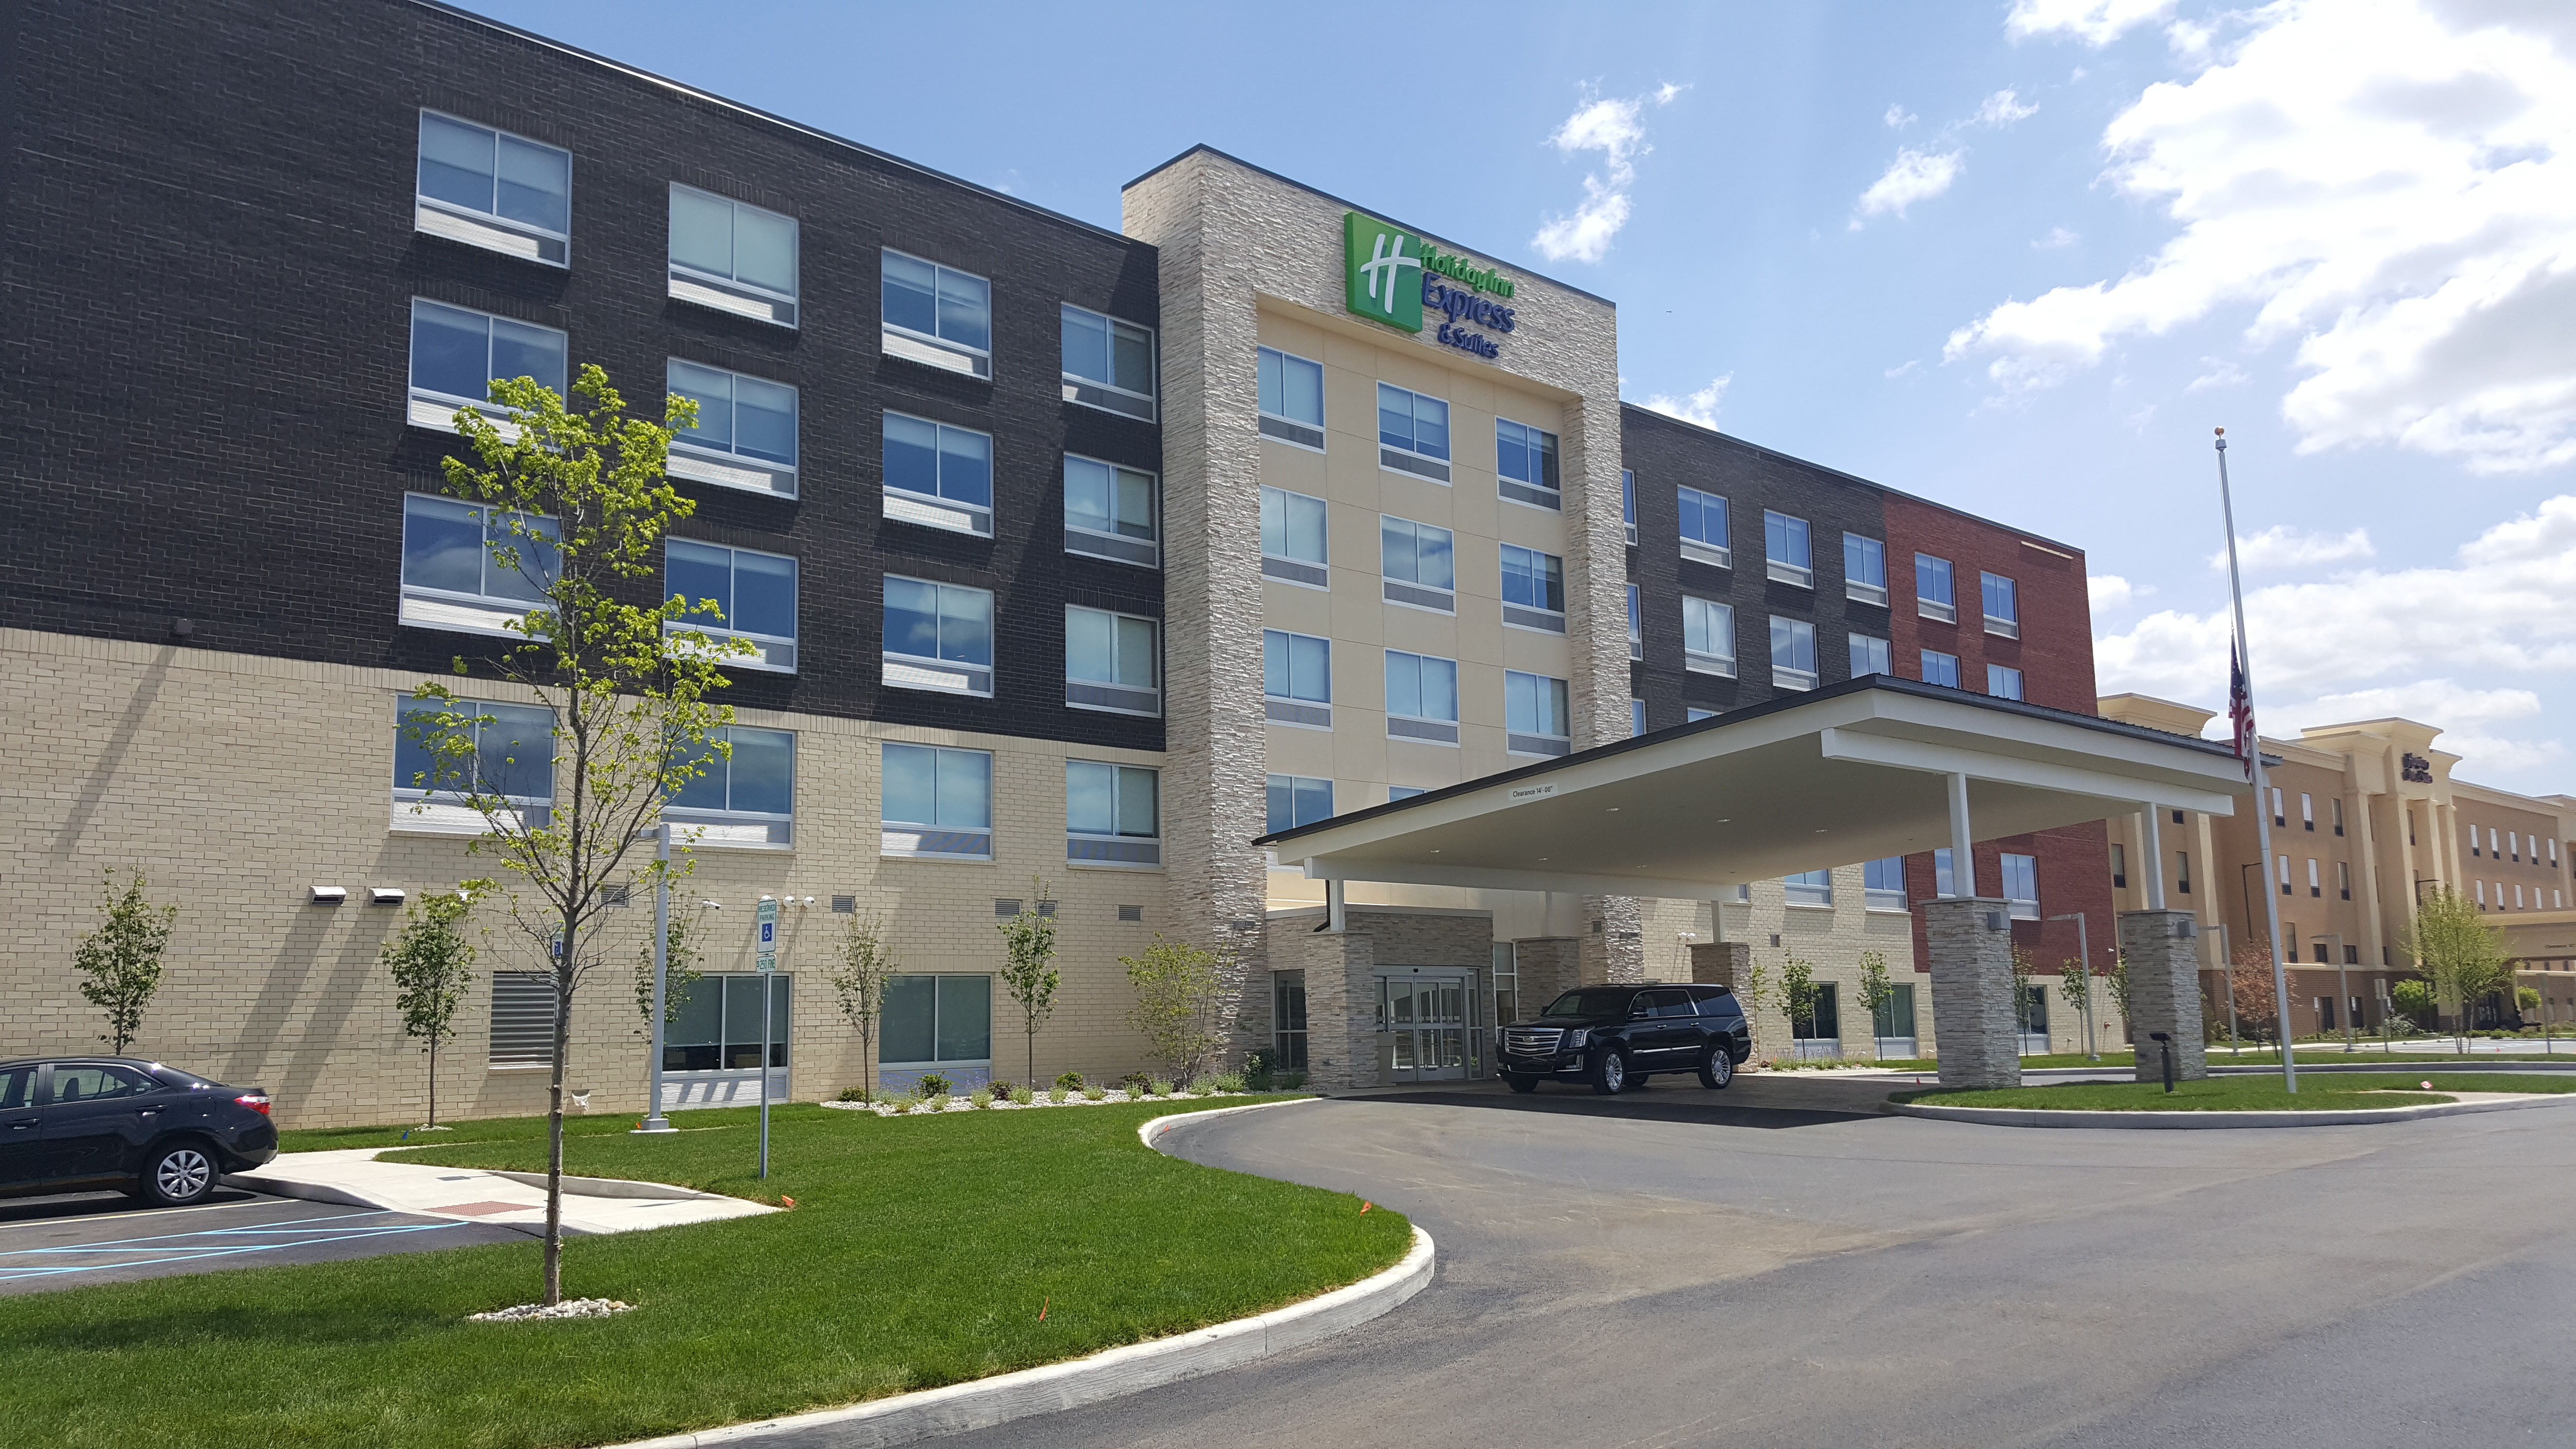 Welcome to Holiday Inn Express & Suites Toledo West!